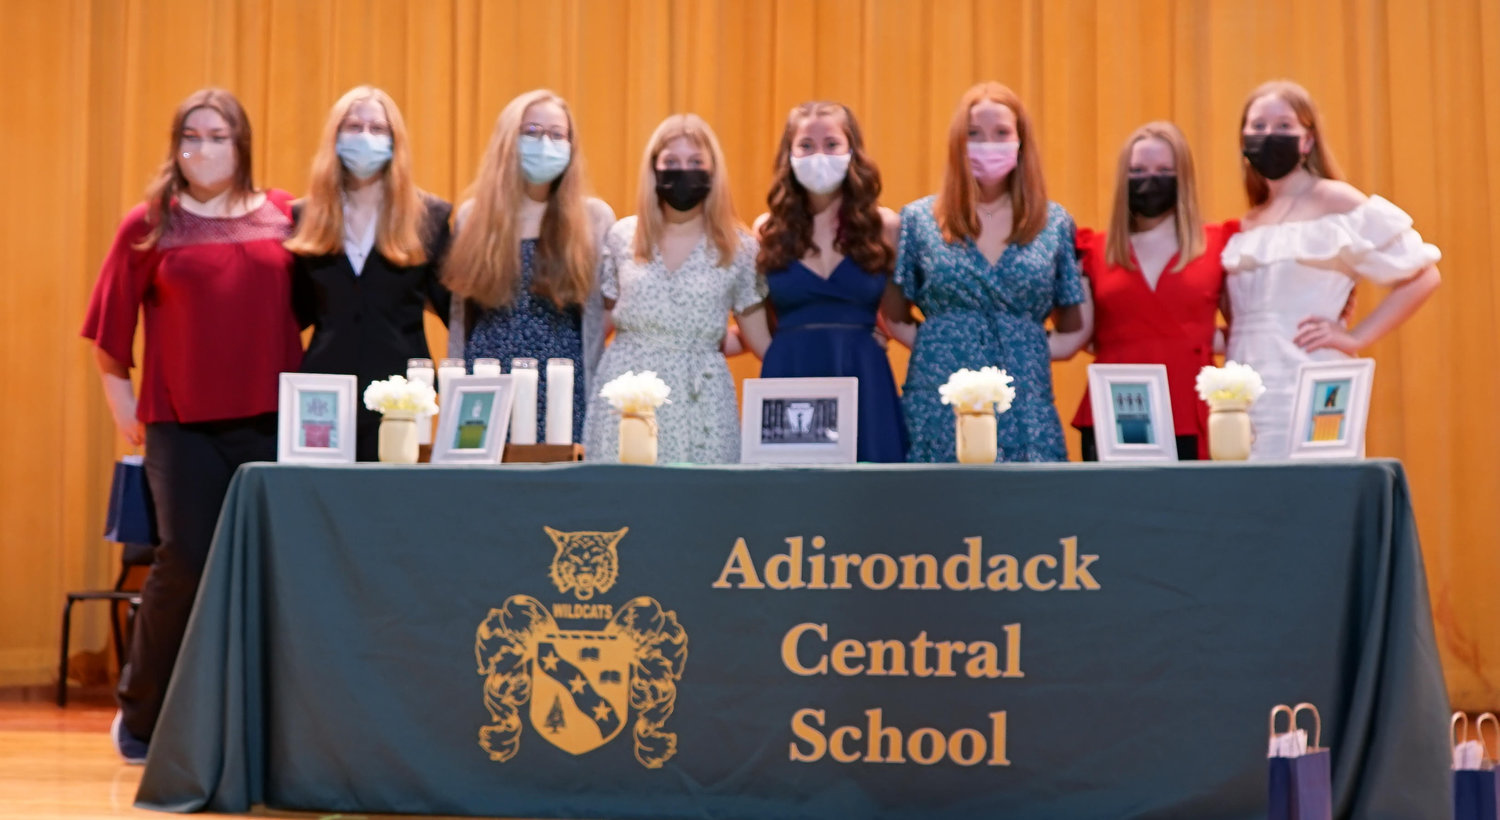 OFFICERS — The members of the 2021-2022 Adirondack Central School National Honor Society officers include, from left: McKenna VanDreason, Kenzie Karpinski, Isabella Miller, Rachel Bellinger, Kaliee Underwood, Kaitlin Gallo, Zoey Pruckno, and Sarah Wiedmer.